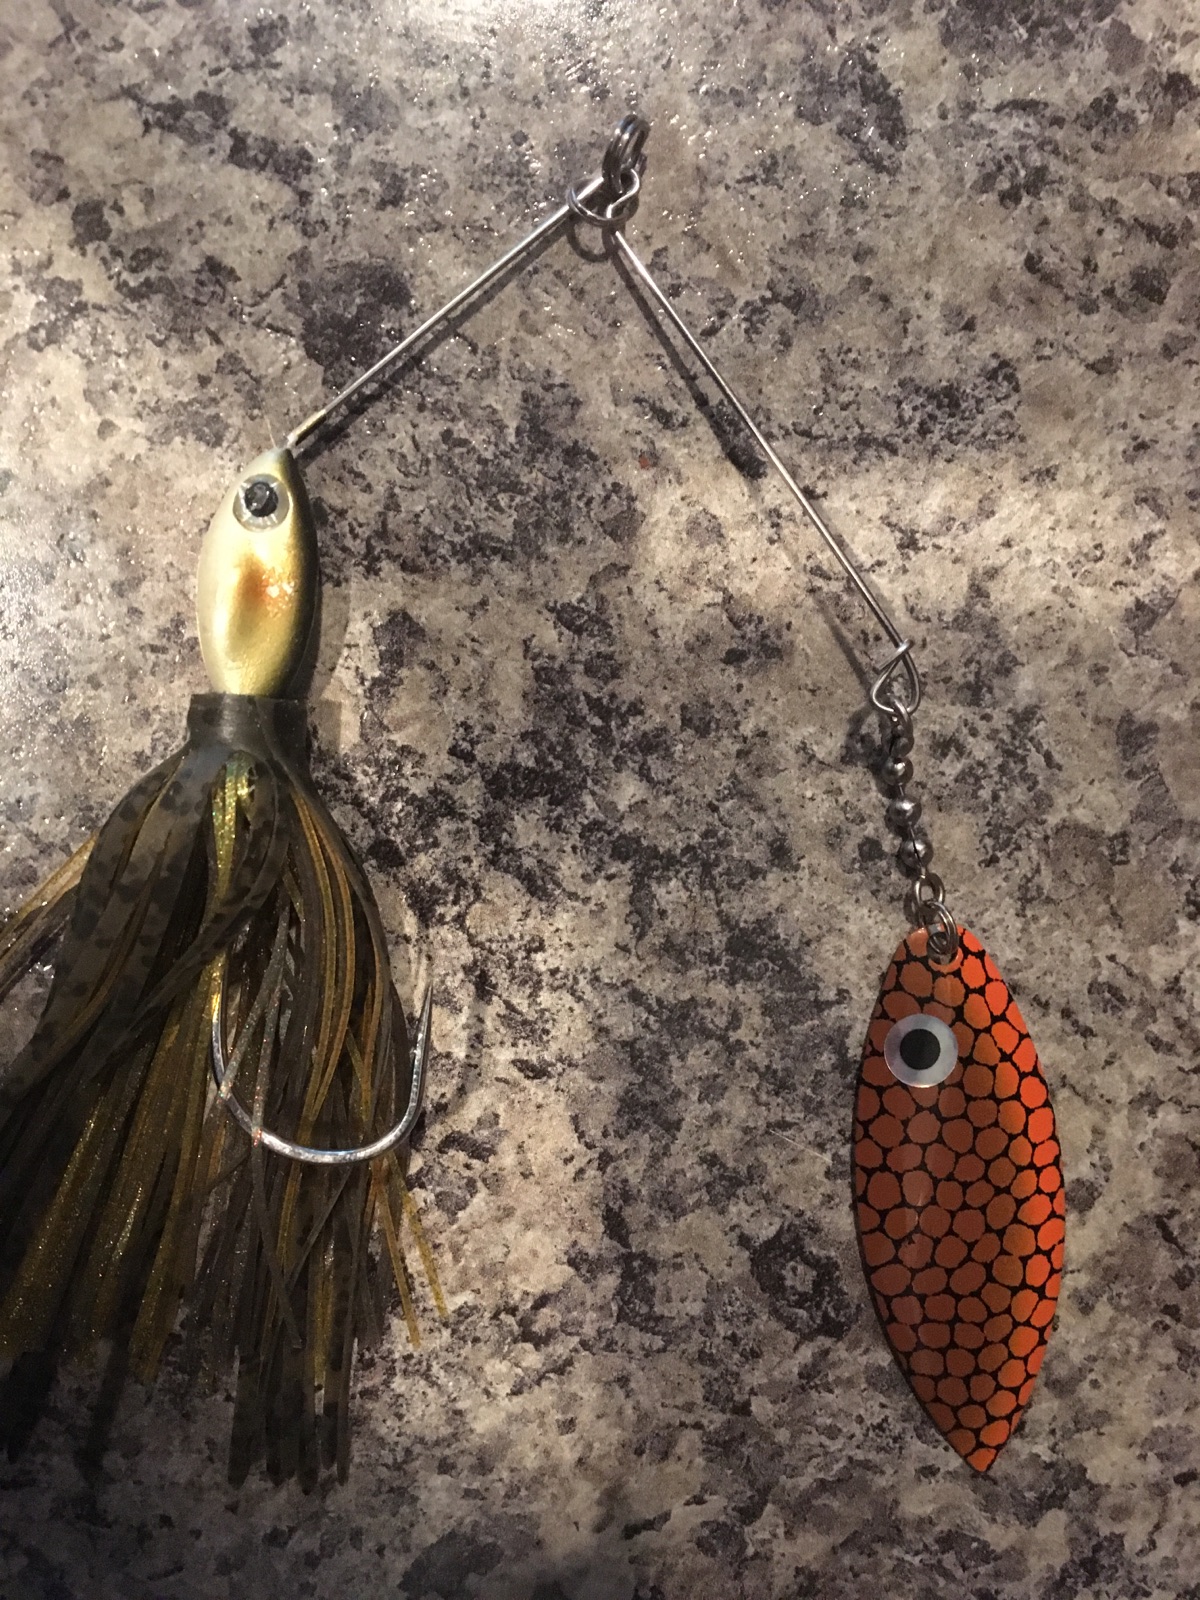 Do you use a swivel with a spinner bait